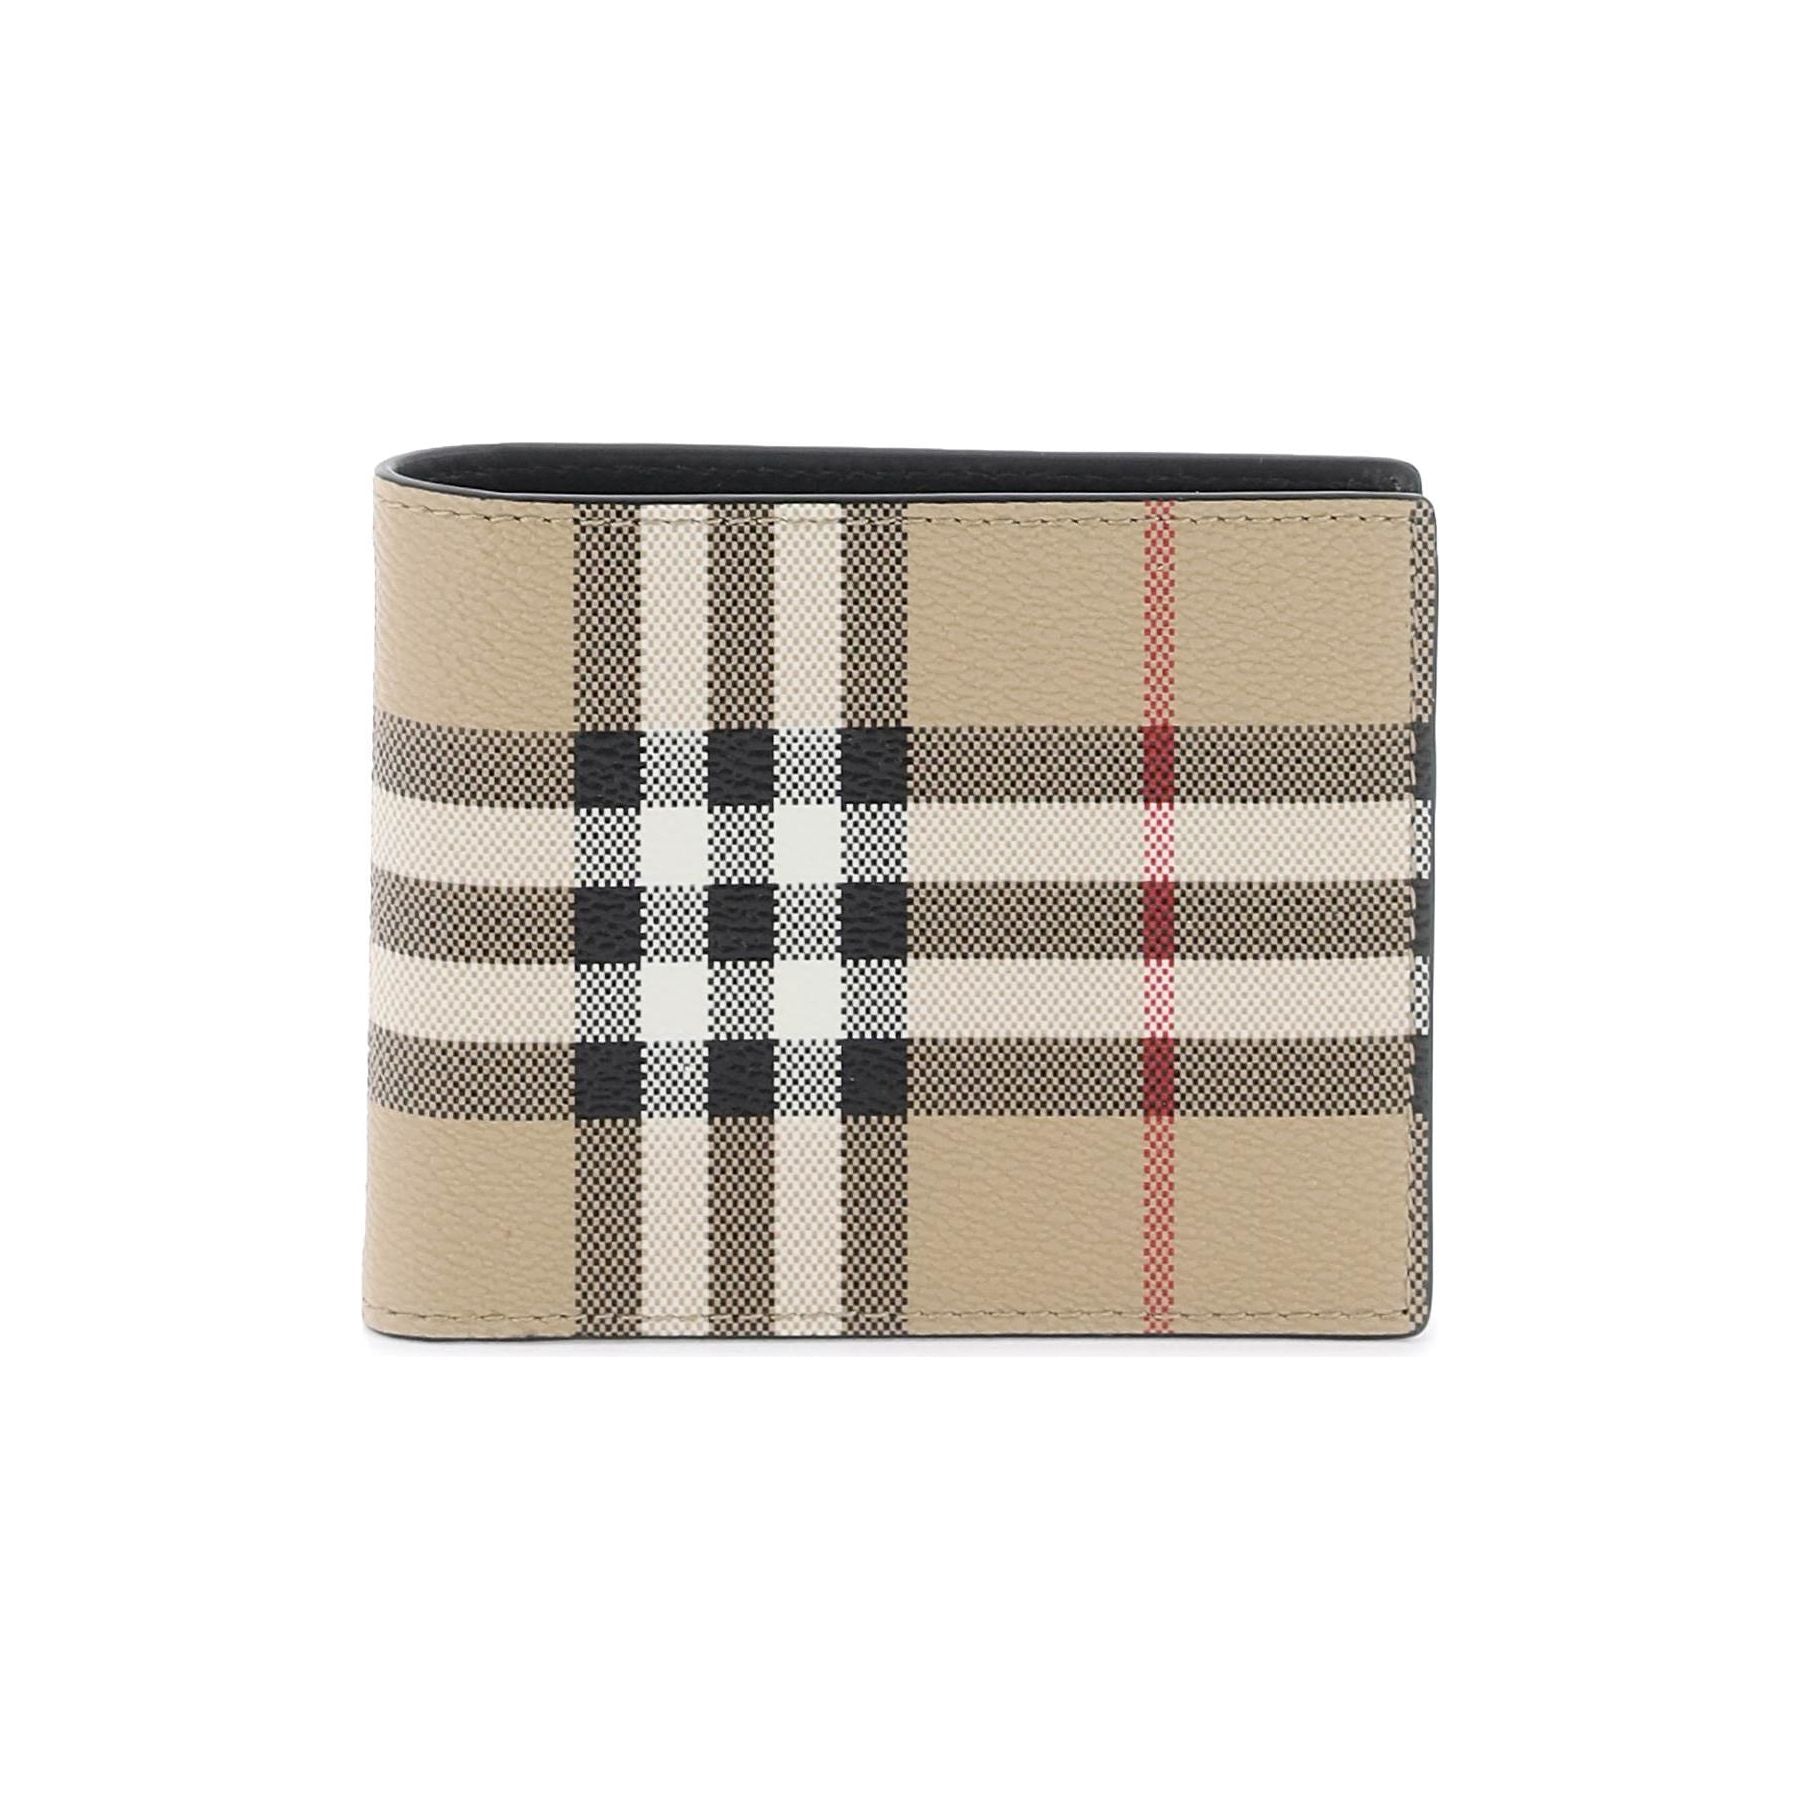 Bifold Wallet With Check Motif